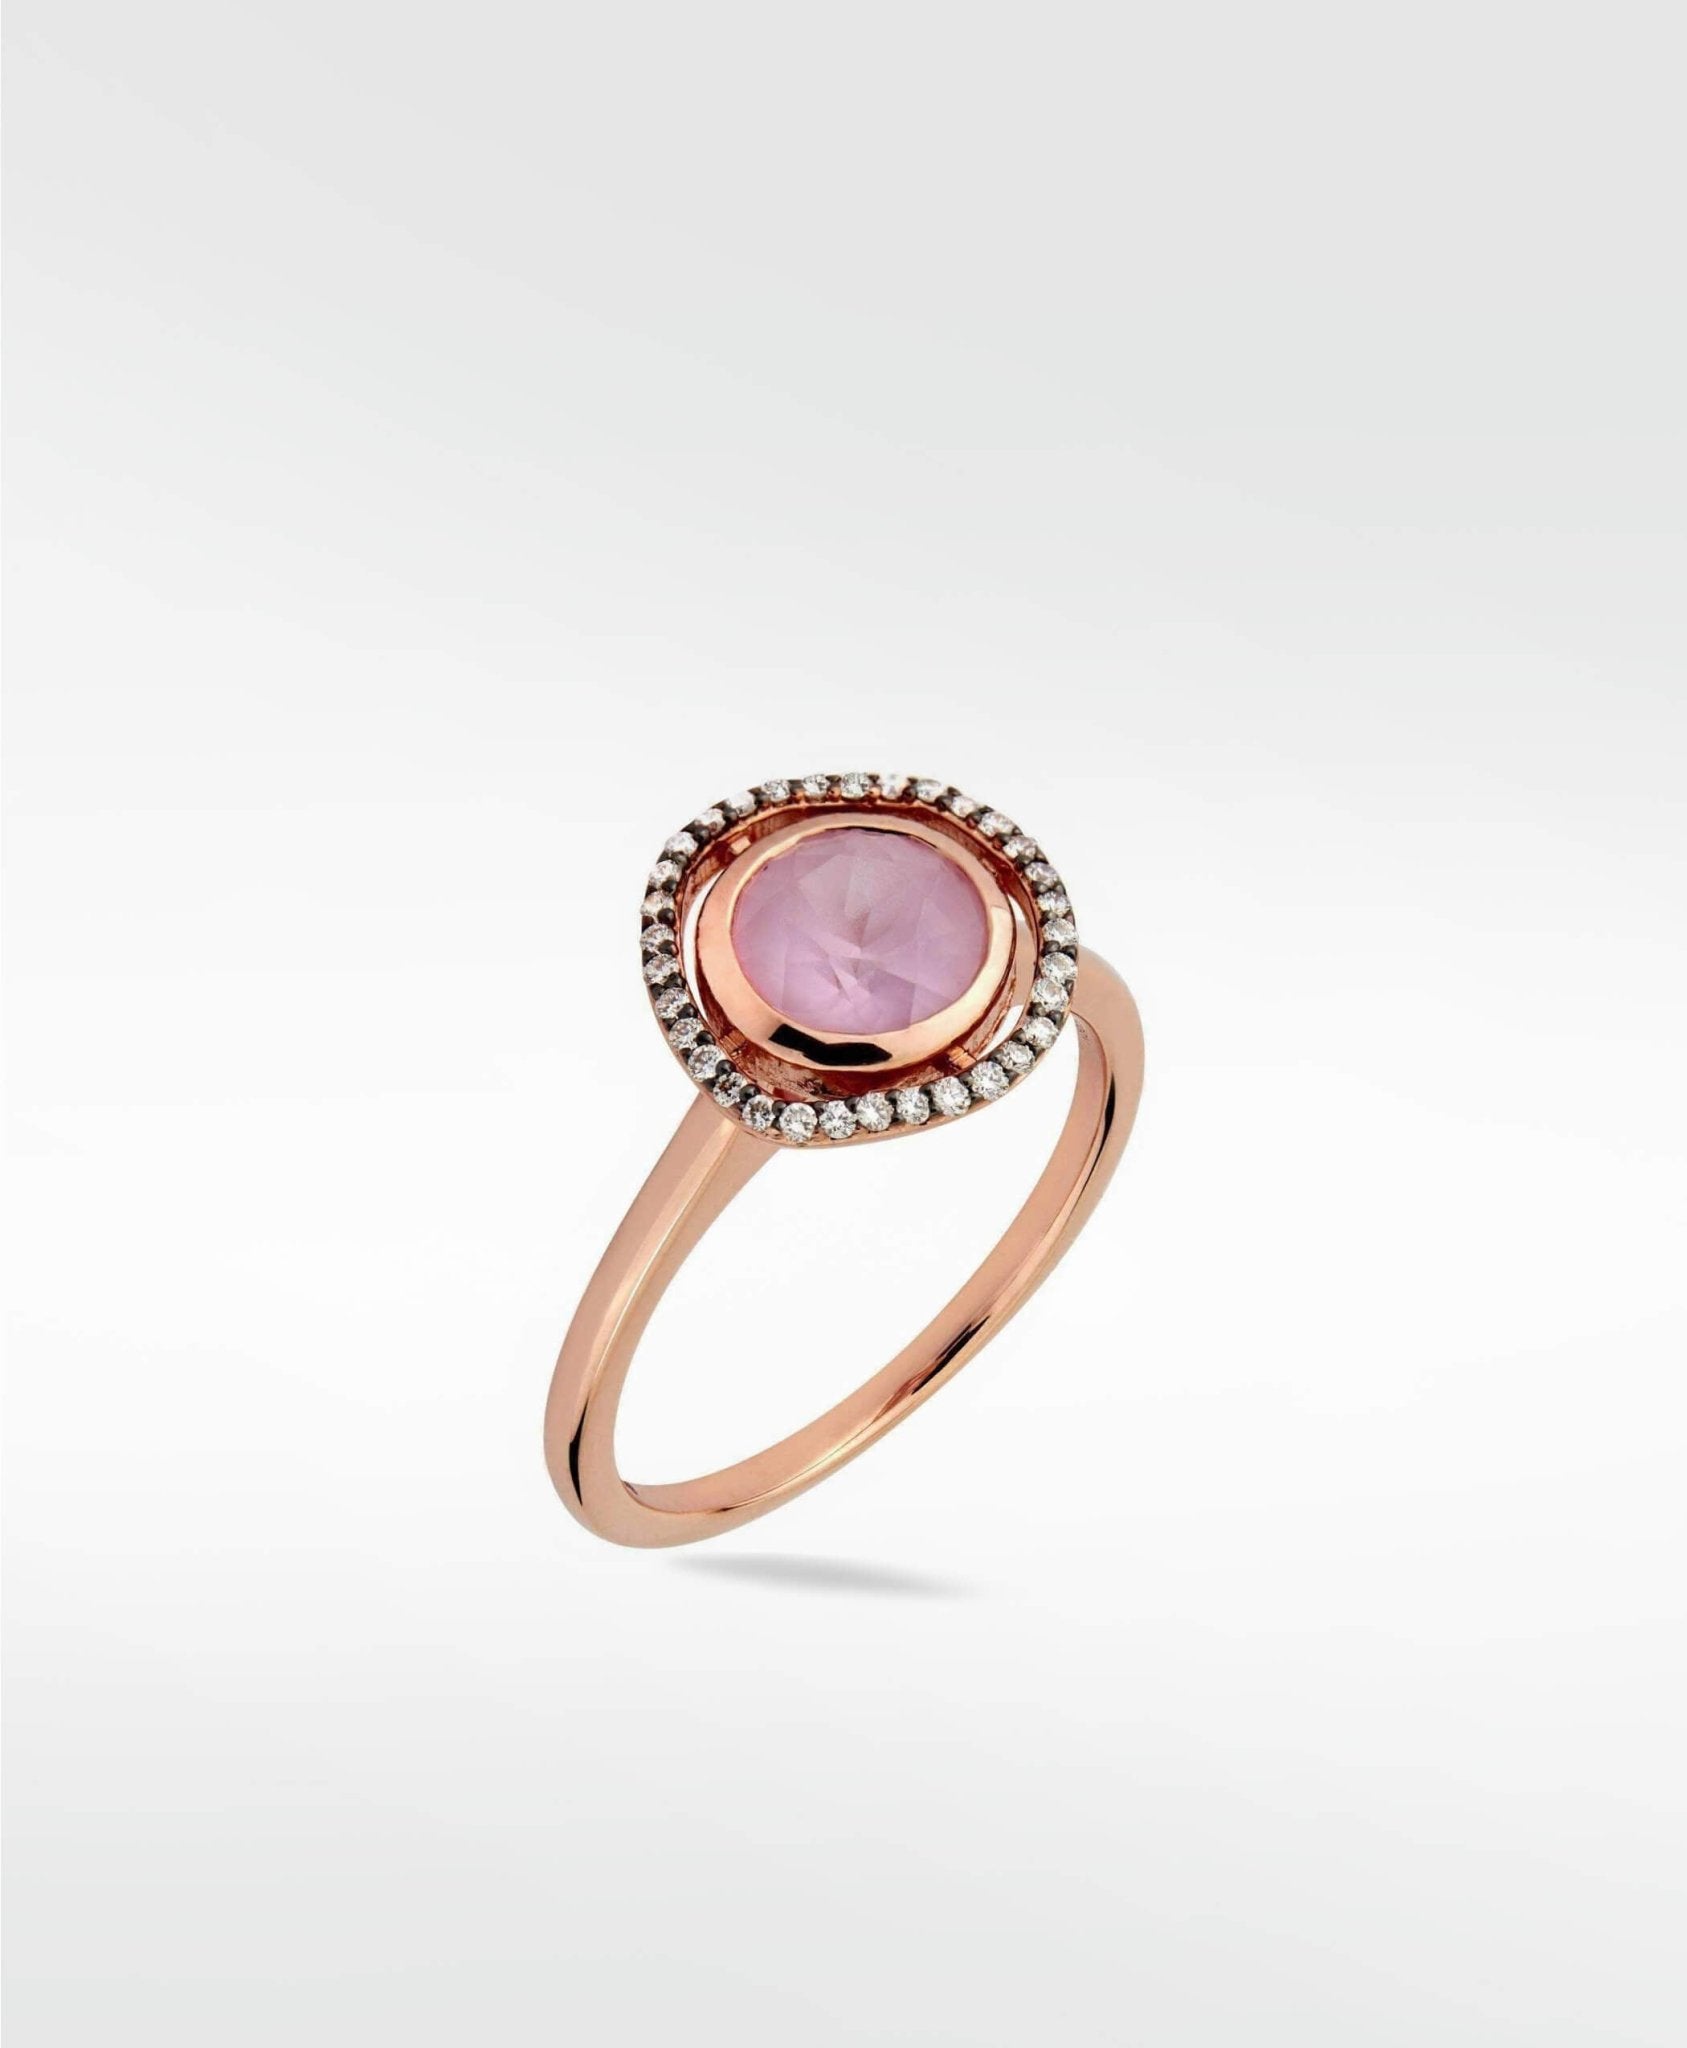 Halo Dark Sapphire Ring in Solid 14K Rose Gold - Lark and Berry